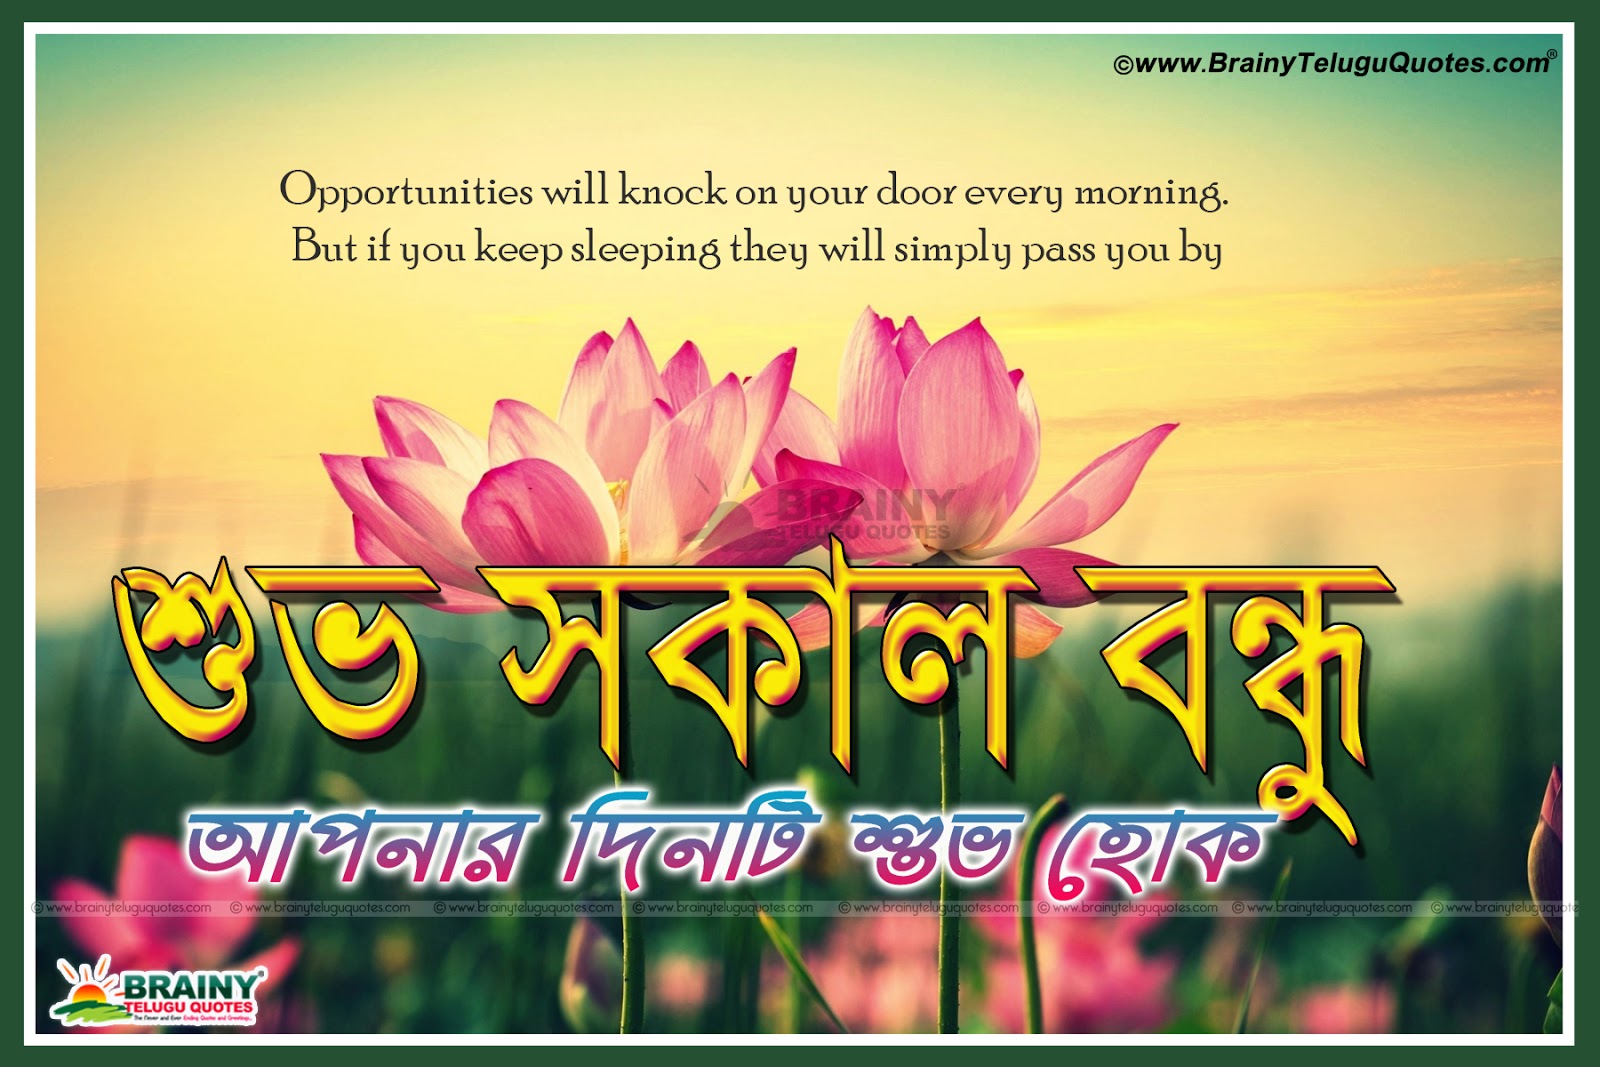 Good Morning Wishes Quotes With Bengali Greeting Cards Online | Brainyteluguquotes.comtelugu Quotes|English Quotes|Hindi Quotes|Tamil Quotes |Greetings